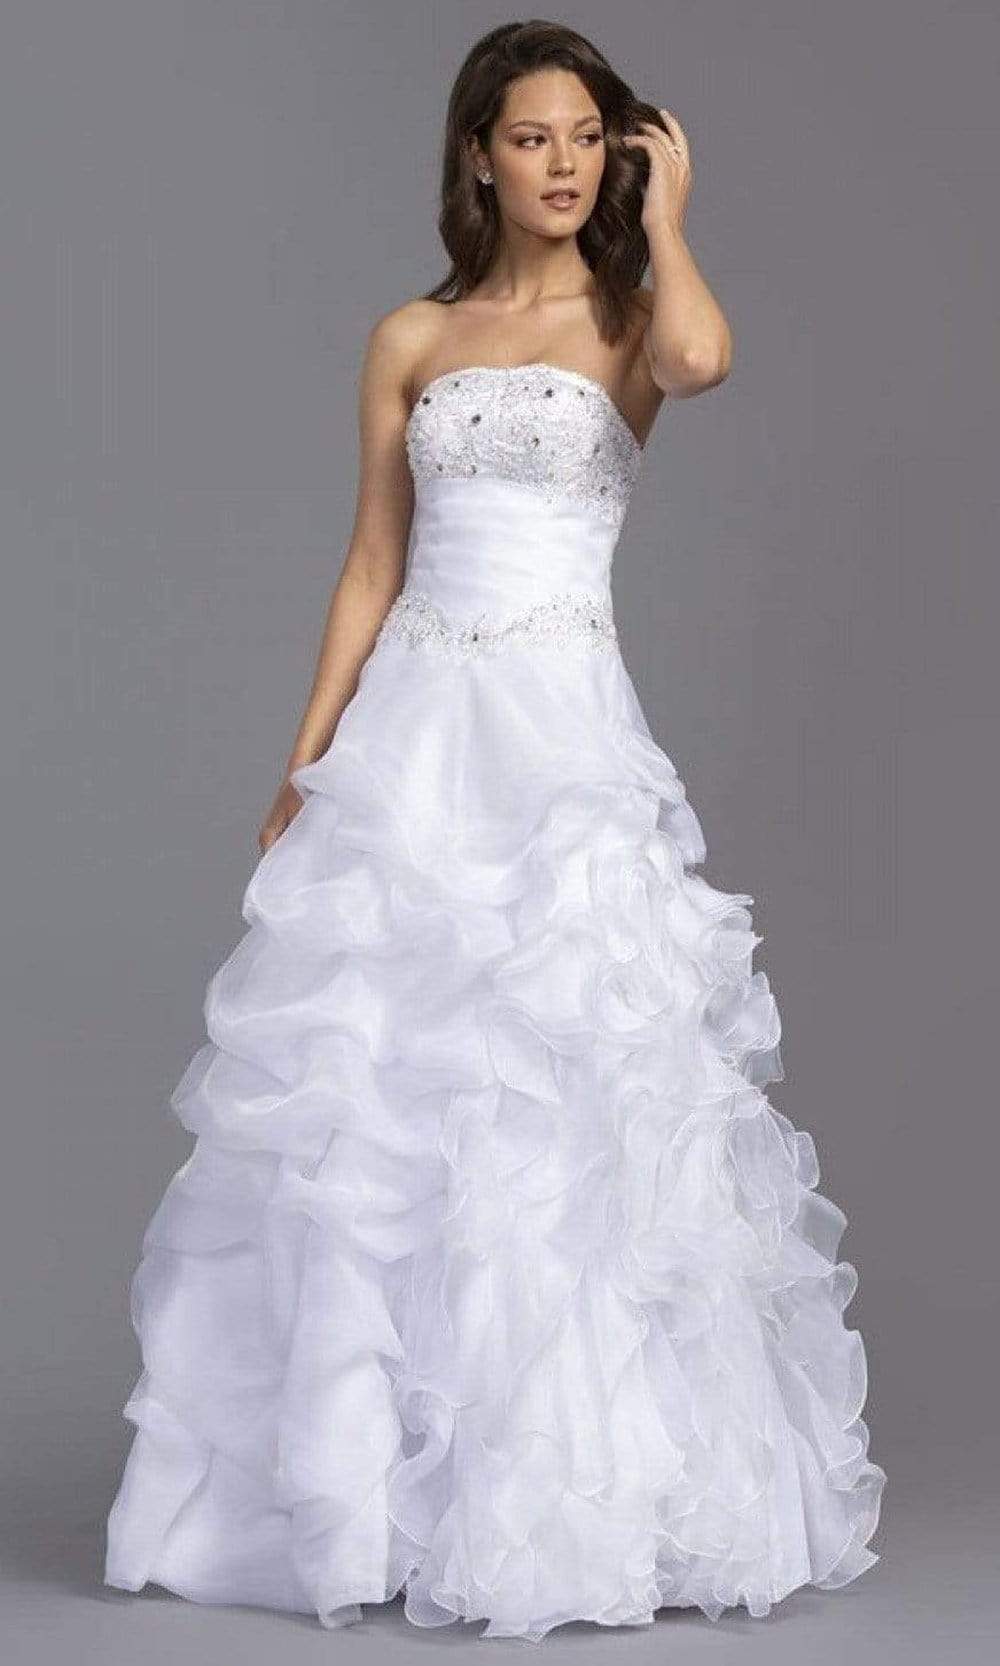 Image of Aspeed Bridal - LH040 Strapless Ruffled A-Line Bridal Gown